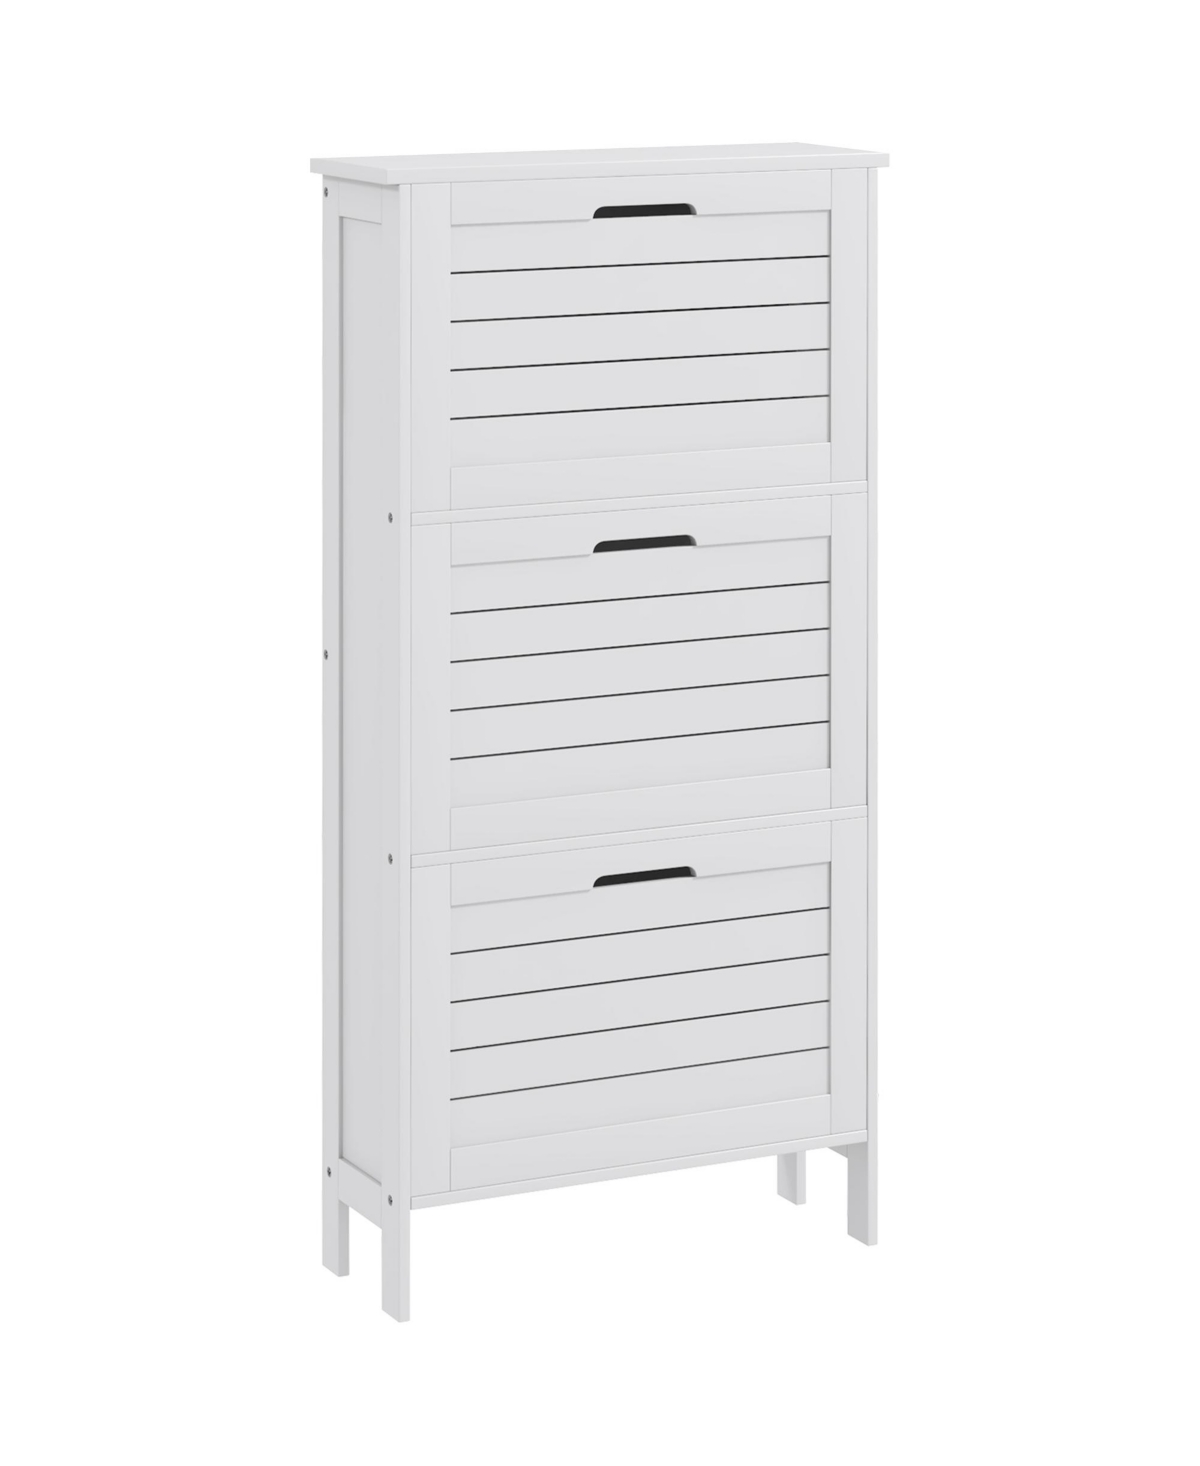 Modern Shoe Cabinet with 3 Flip Drawers for 6 Pairs, White - White